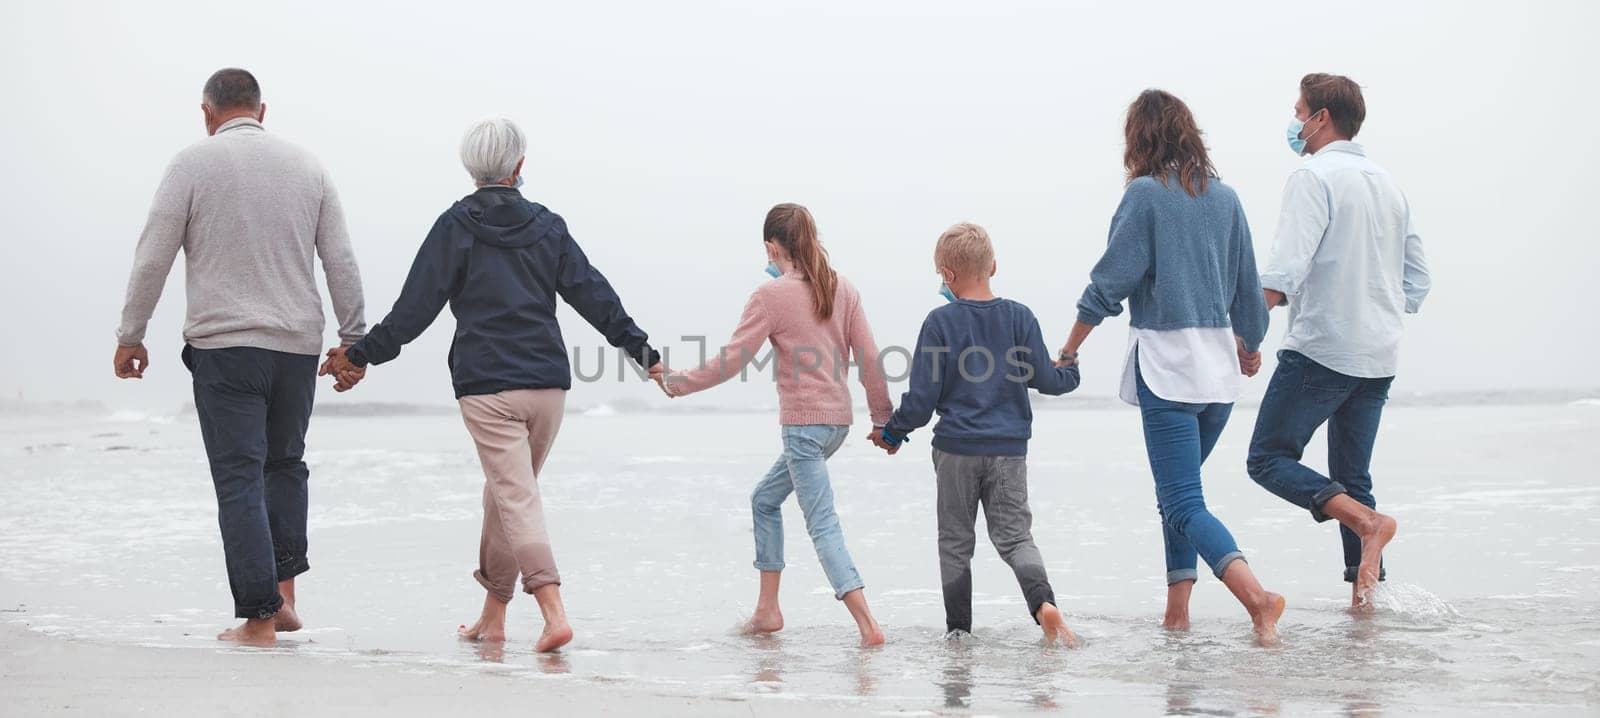 Big family, holding hands and walking on beach for vacation or quality bonding time together in nature. Hand of parents, grandparents and kids enjoying travel, freedom and family fun in ocean water by YuriArcurs